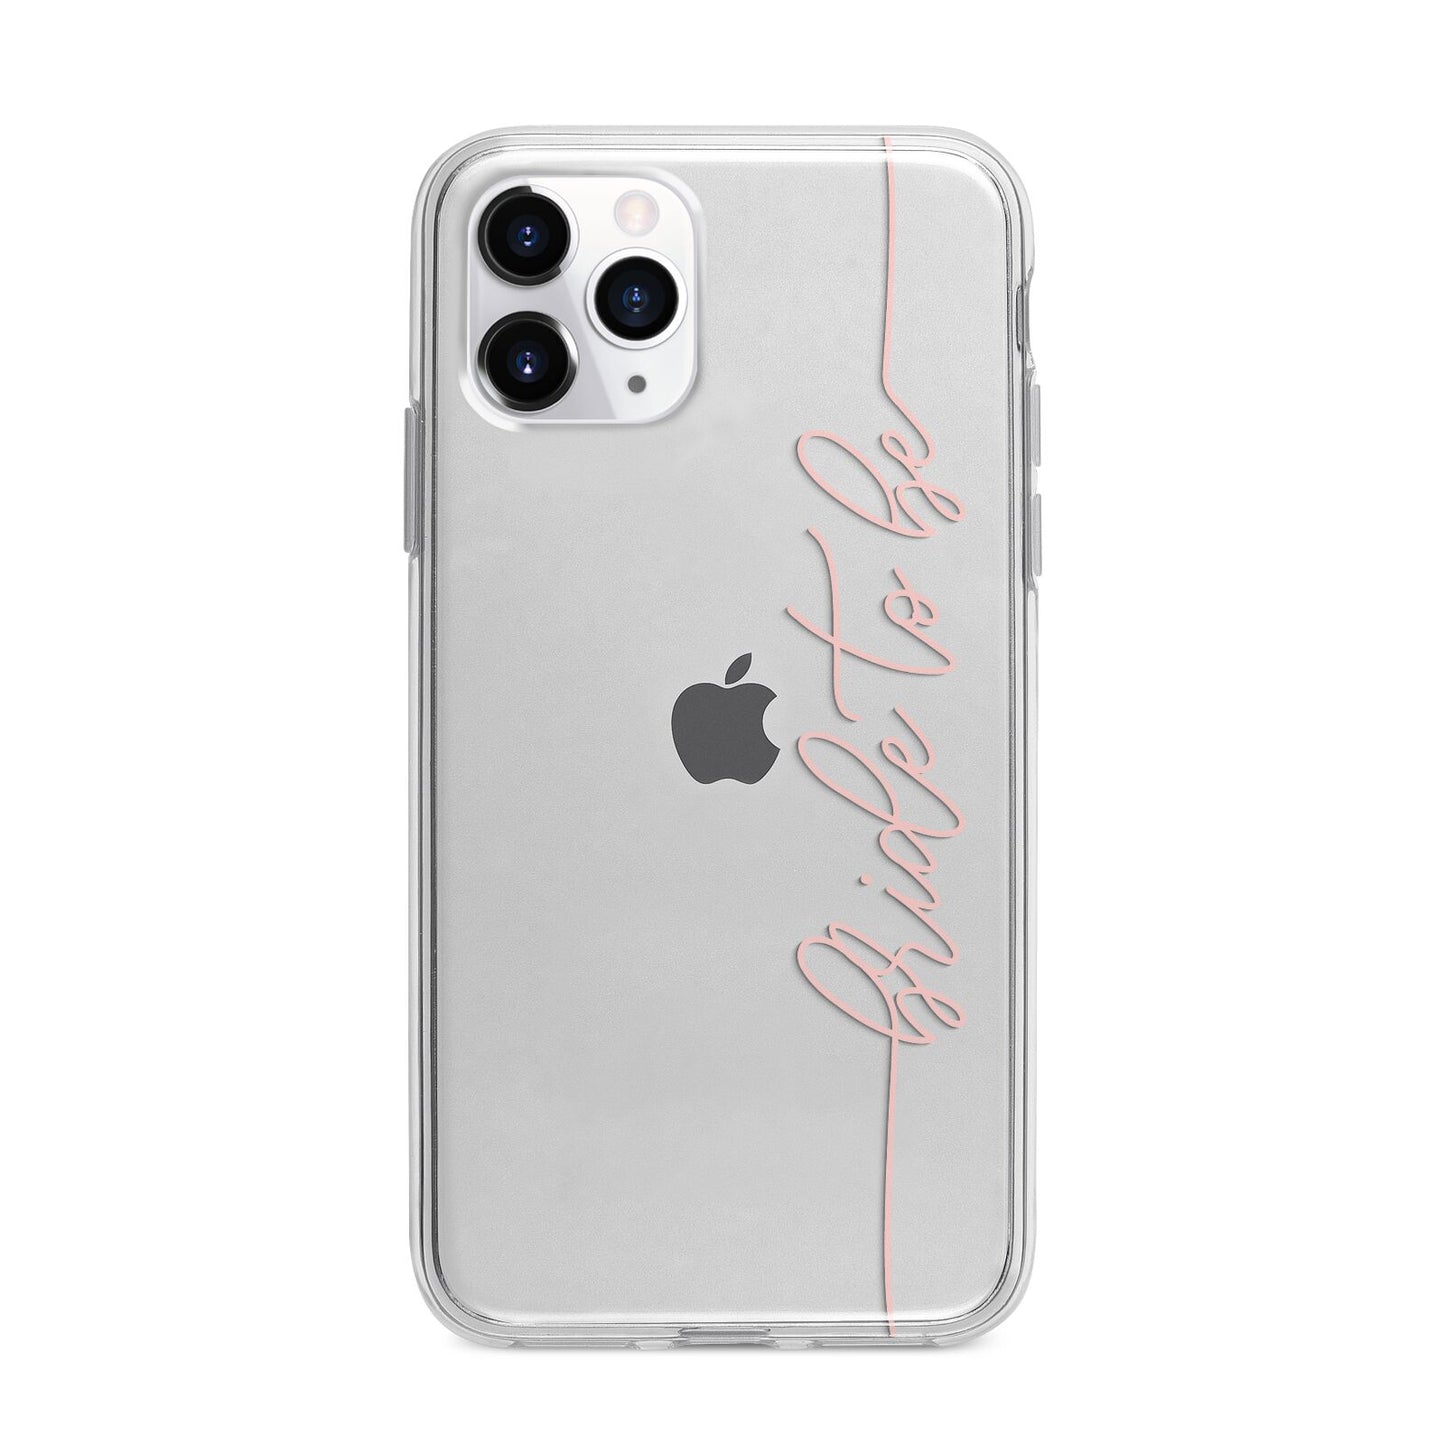 Bride To Be Apple iPhone 11 Pro Max in Silver with Bumper Case